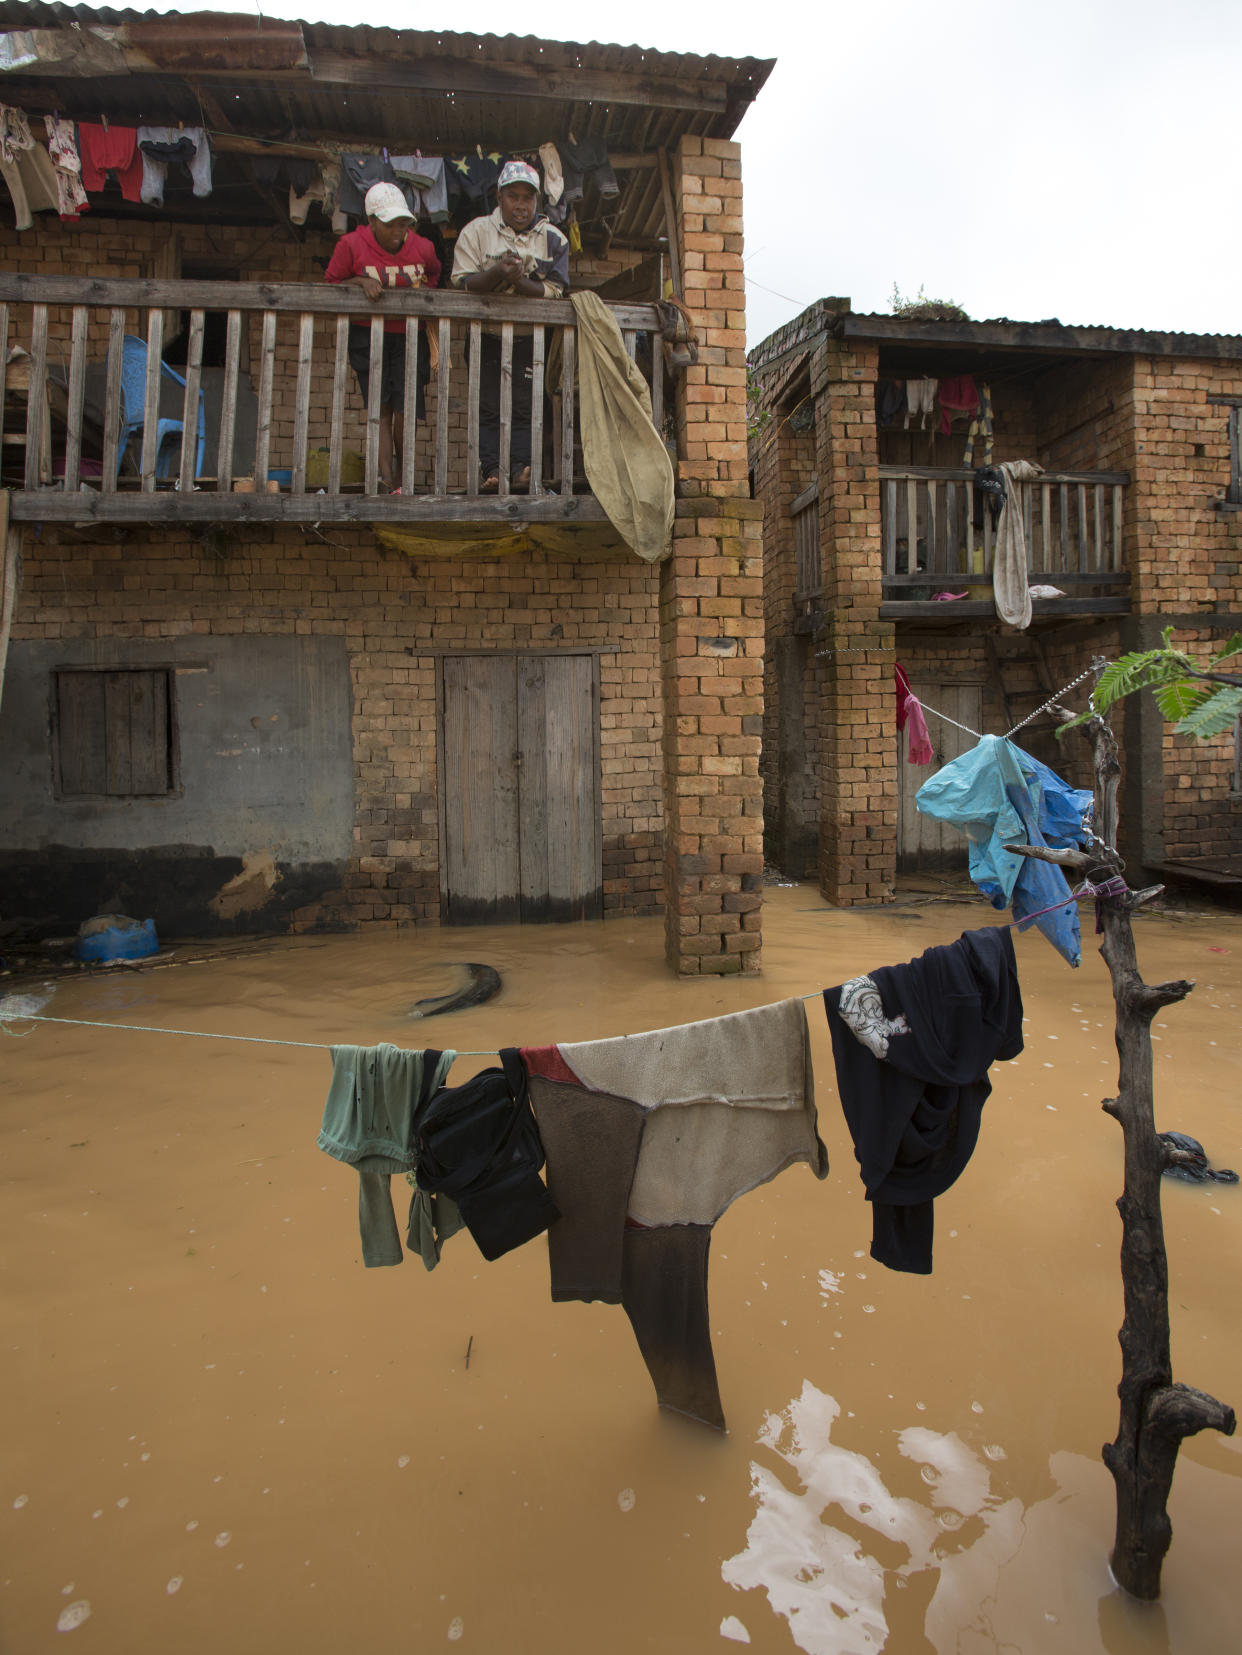 Residents stand on a balcony overlooking a flooded residential street with rain water in Antananarivo, Madagascar, Saturday, Jan. 28, 2023. A tropical storm Cheneso made landfall across north-eastern Madagascar on January 19, brought strong winds to coastal regions, while heavy rain brought significant flooding to northern parts of the country. (AP Photo/Alexander Joe)